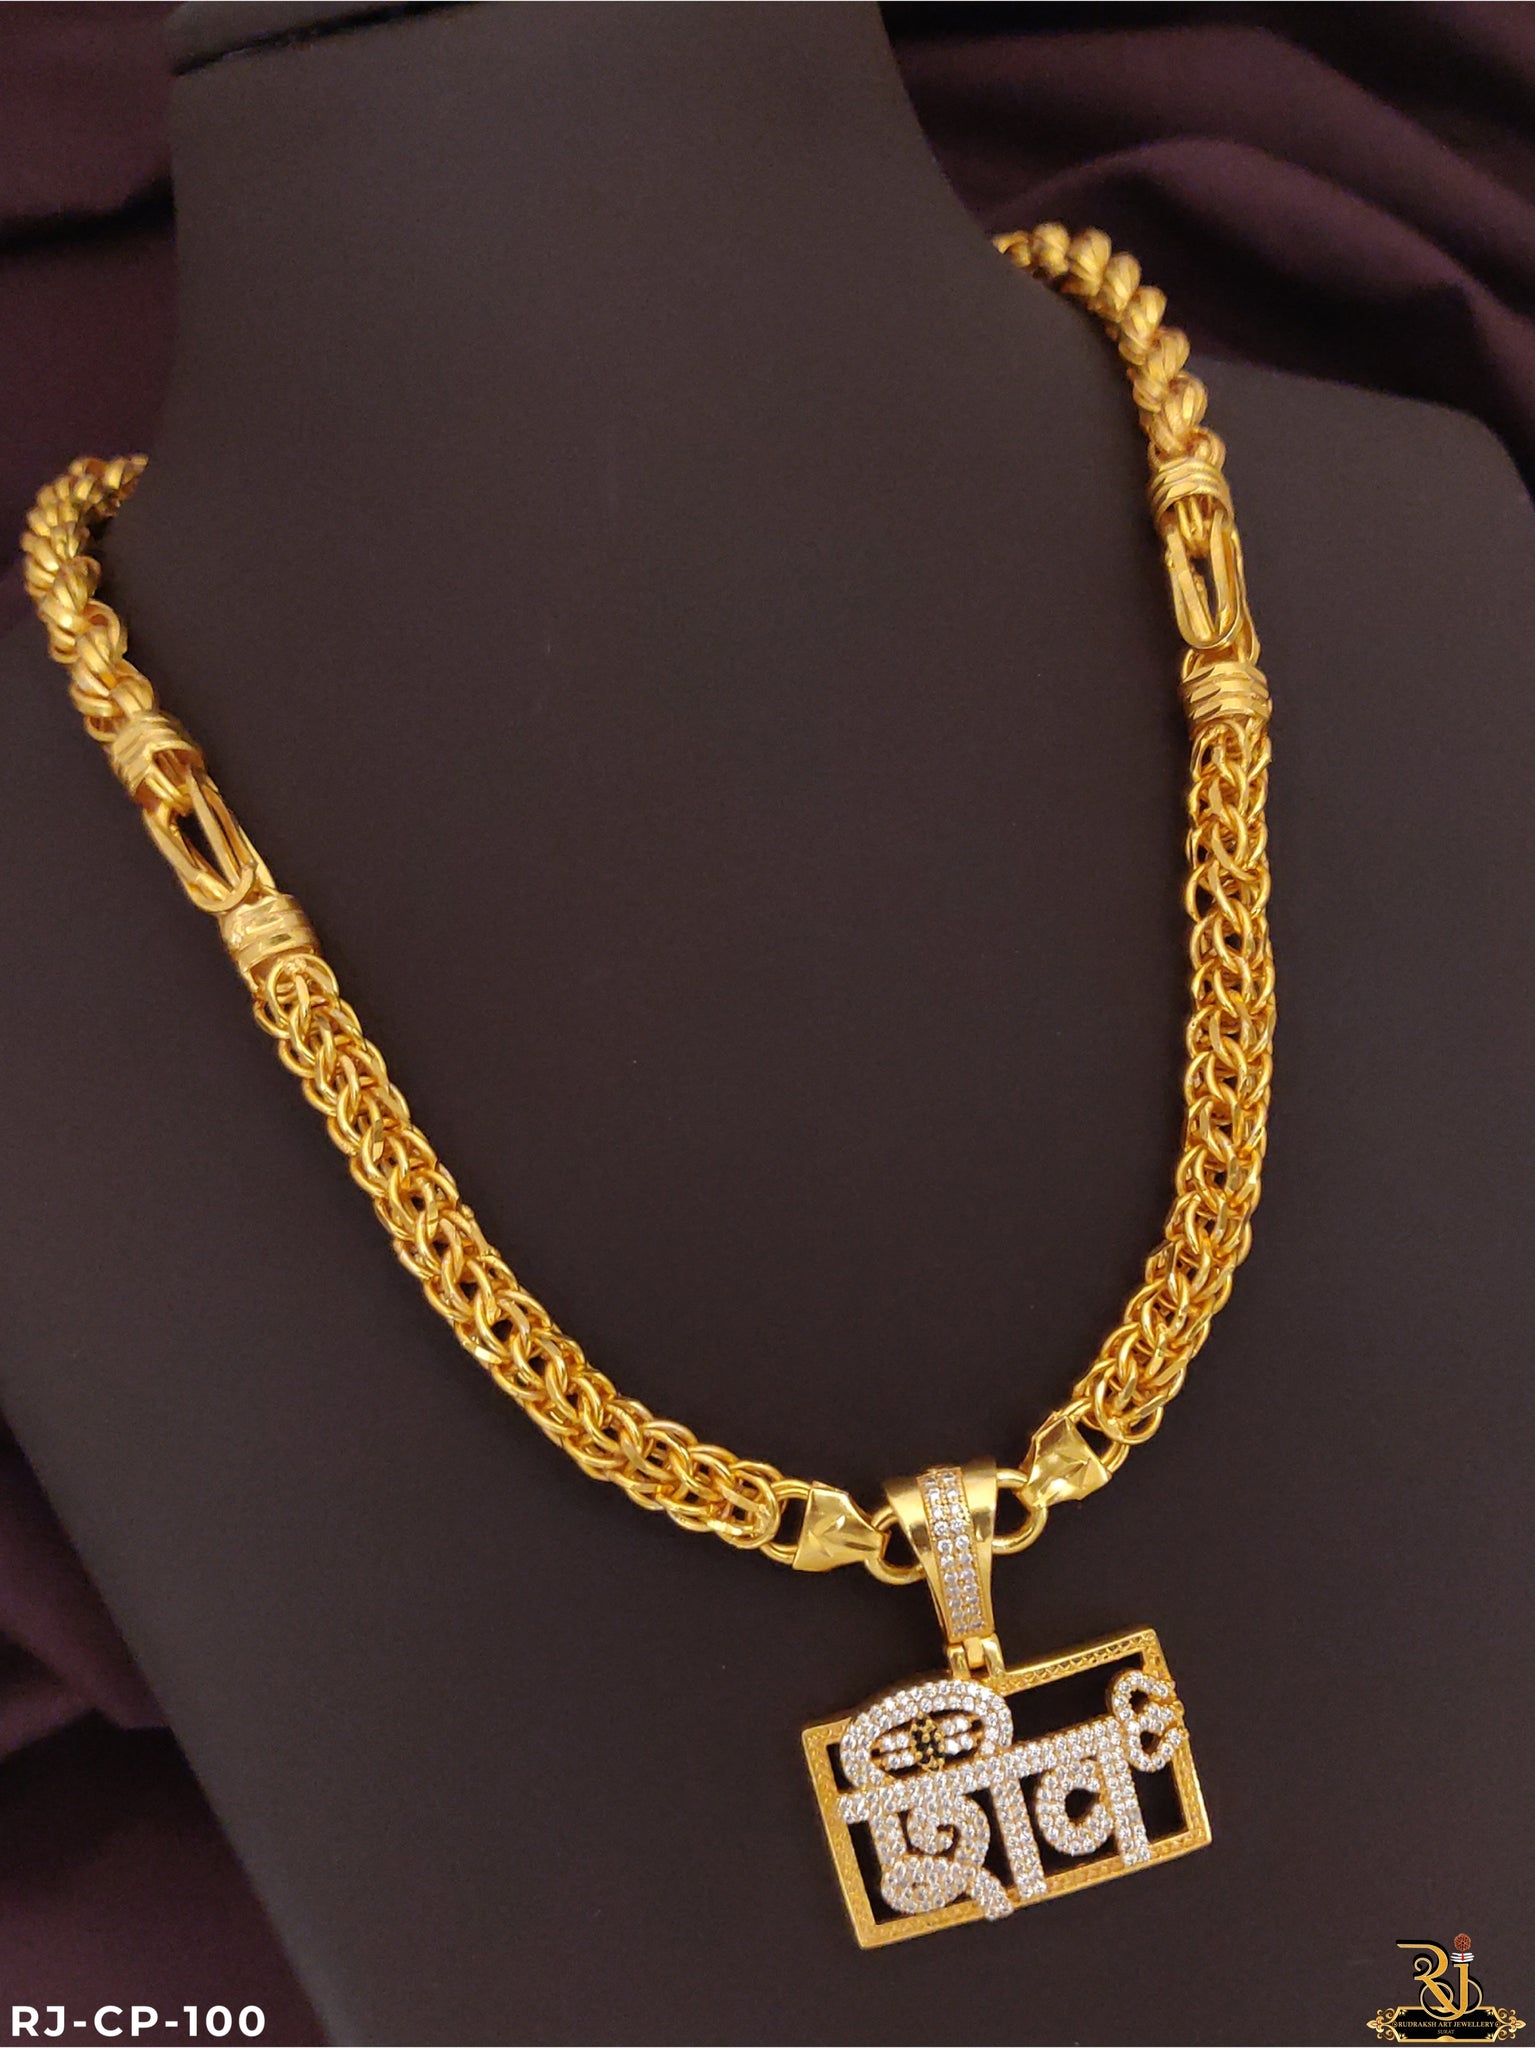 Indo Desing GoldPleted Men’s Fashion Chain With Shiv Hiphope pendant CP-100